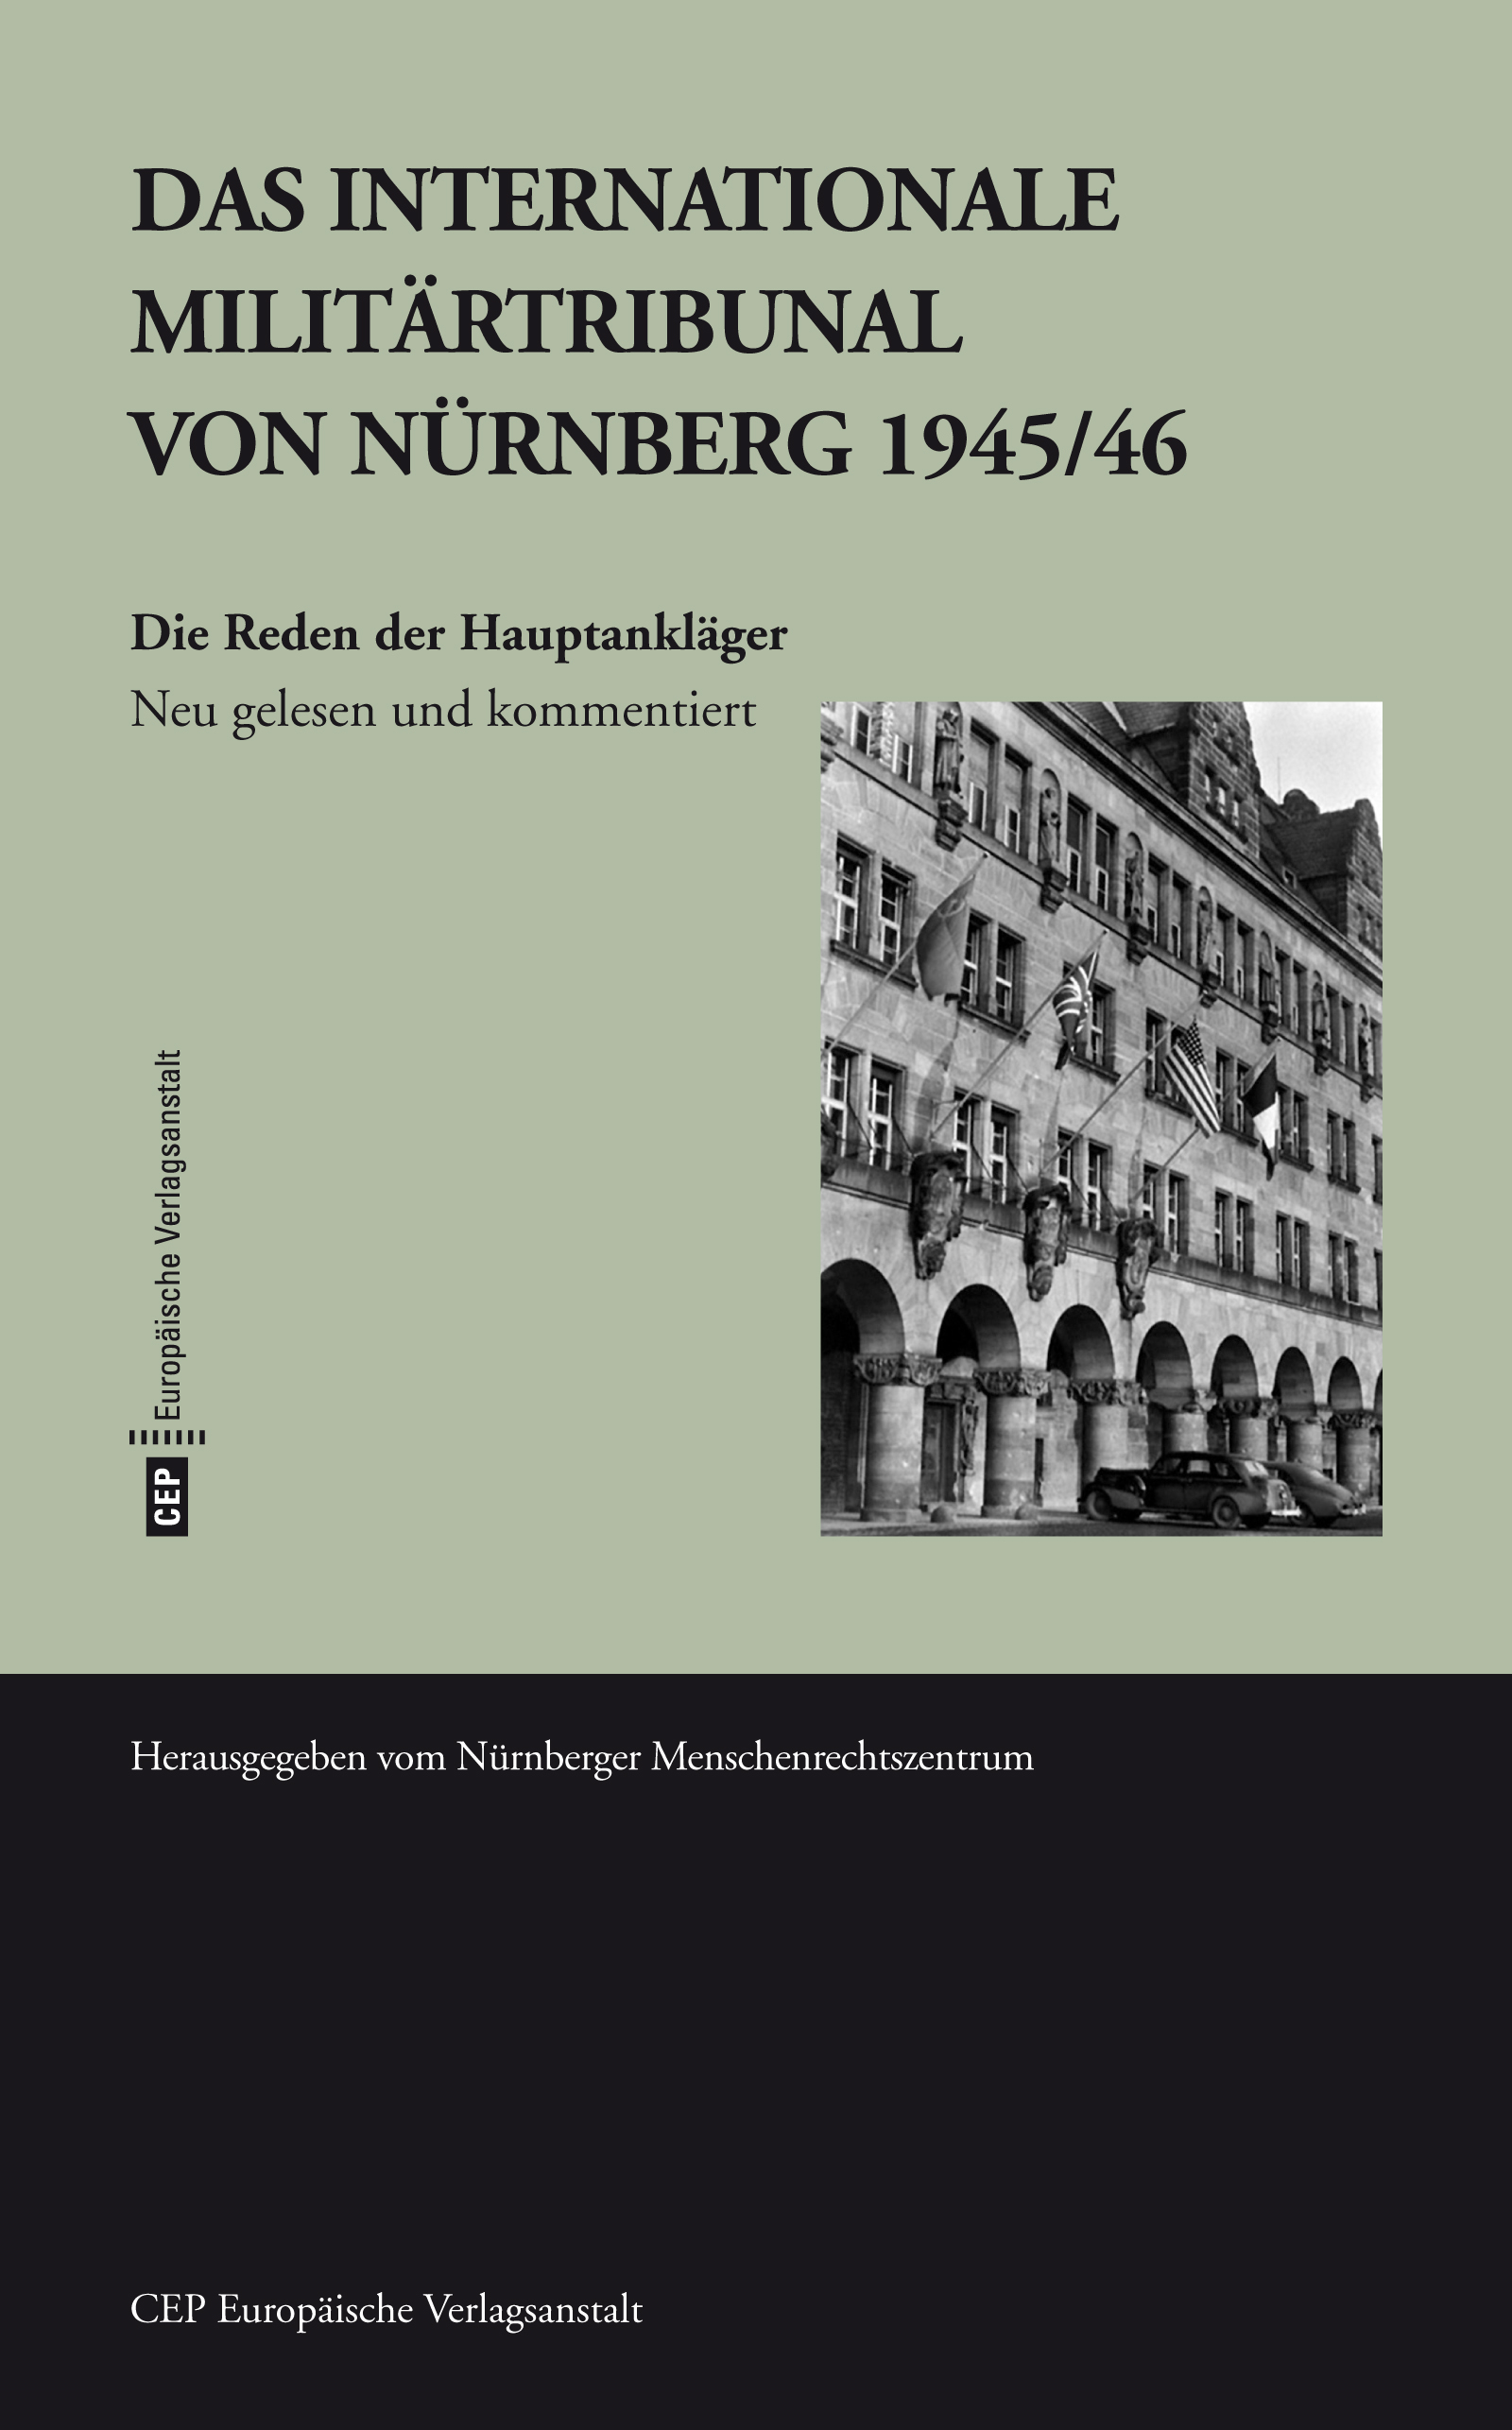 CEP_Cover_Nuernberg_RZ.indd